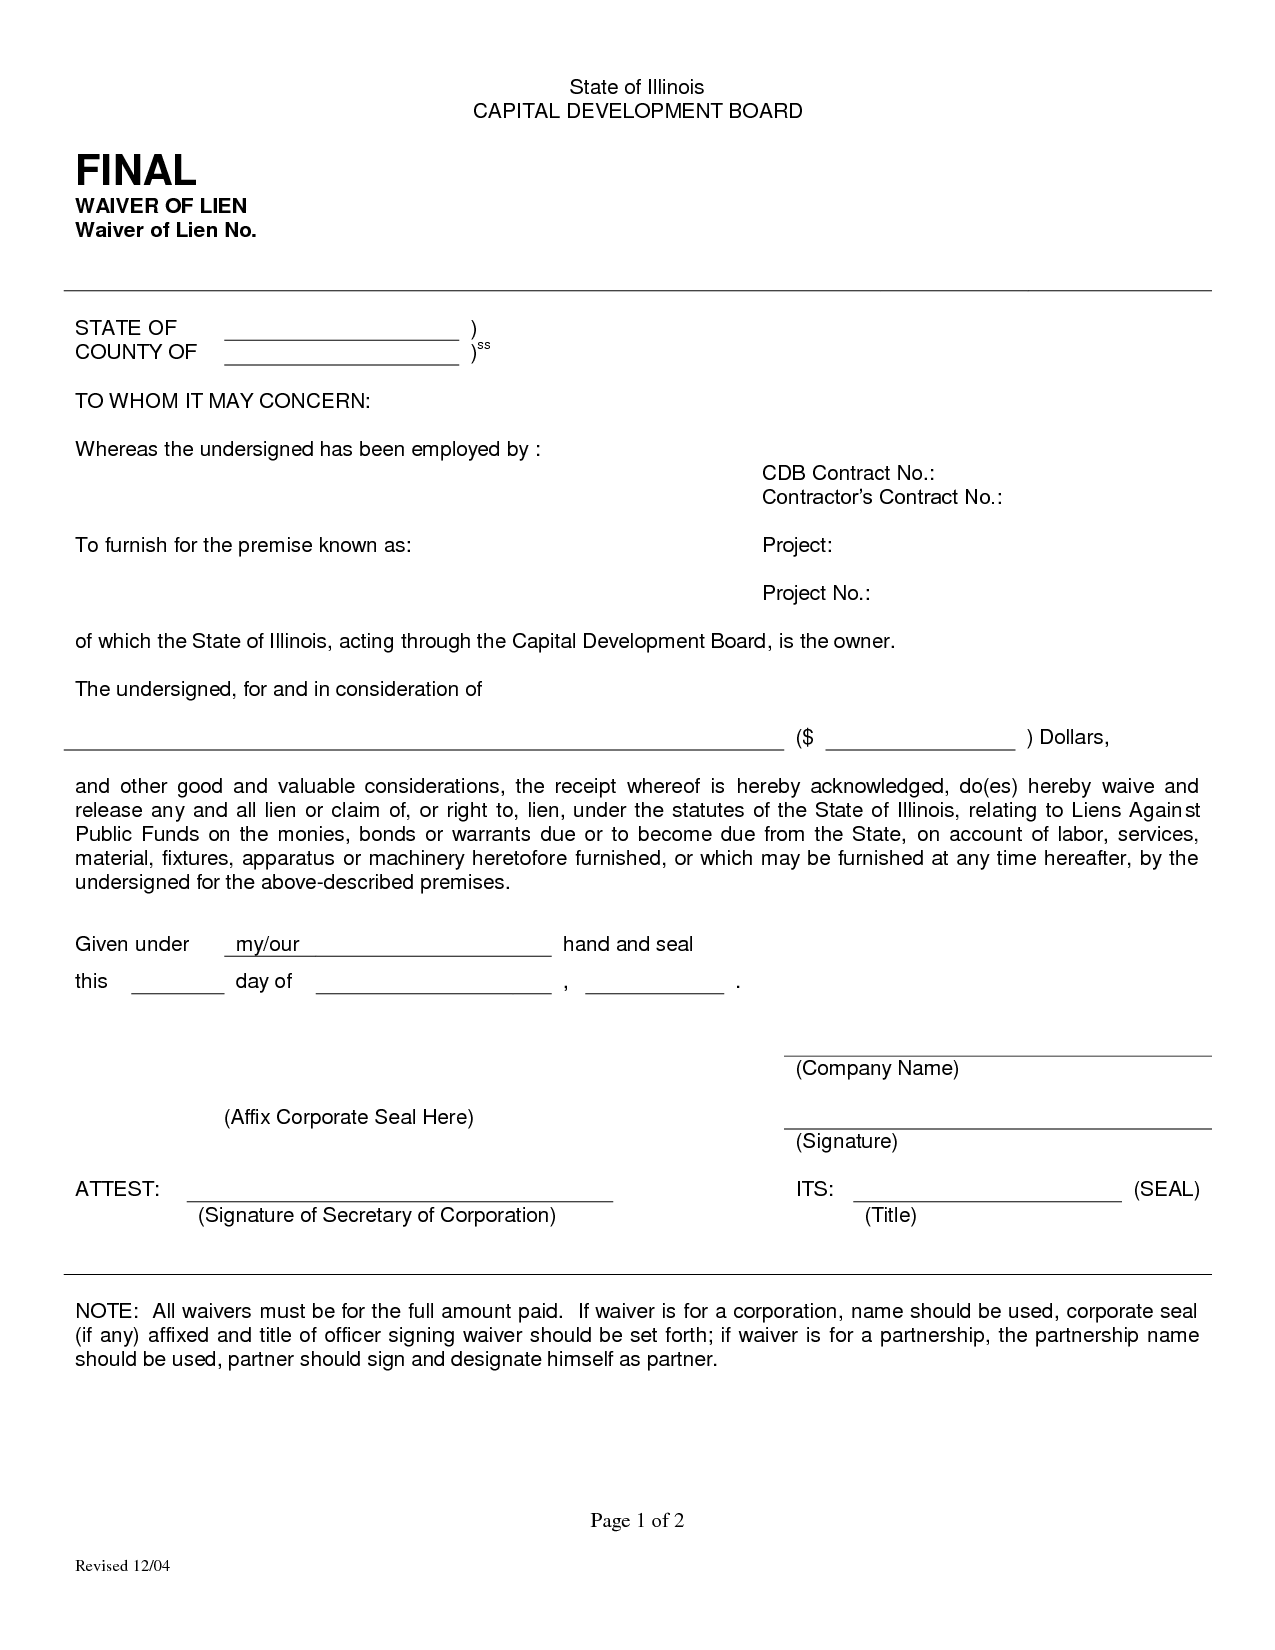 sample-waiver-form-free-printable-documents